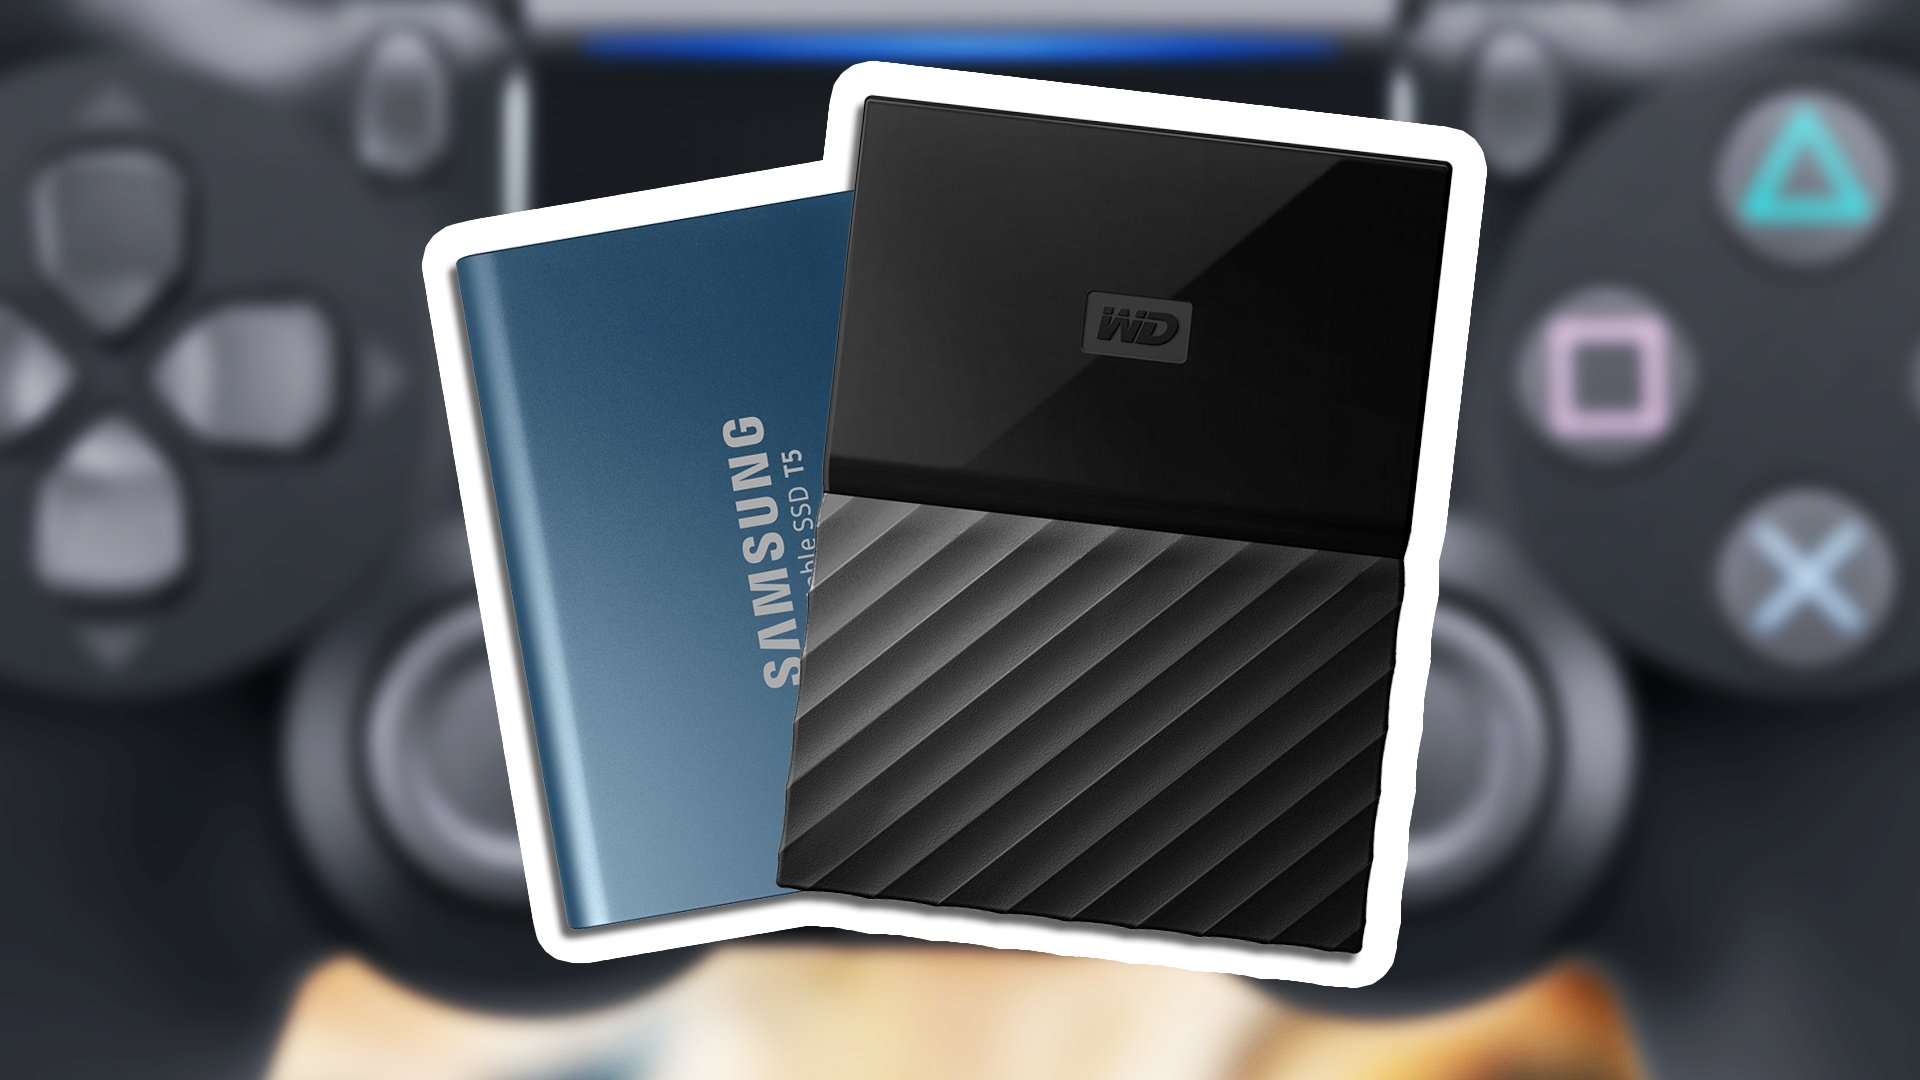 external storage for ps5